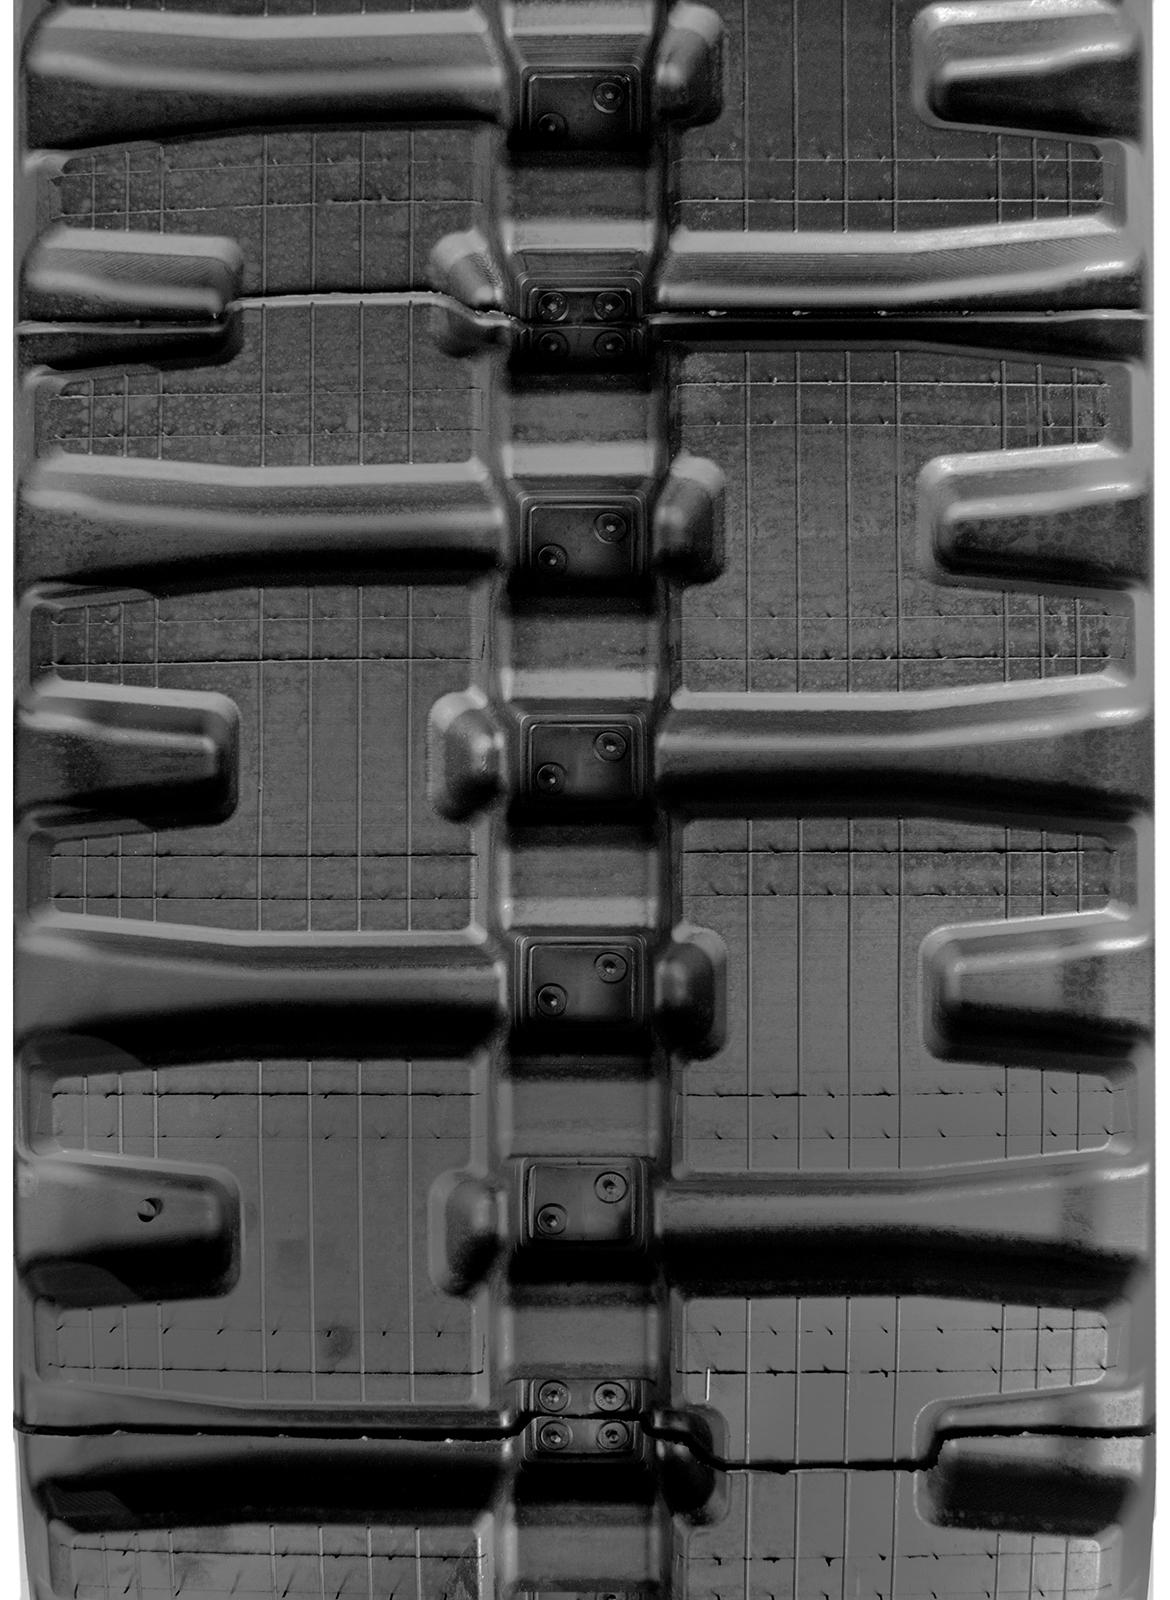 set of 2 13" camso extreme duty hxd pattern rubber tracks (320x86bx50)